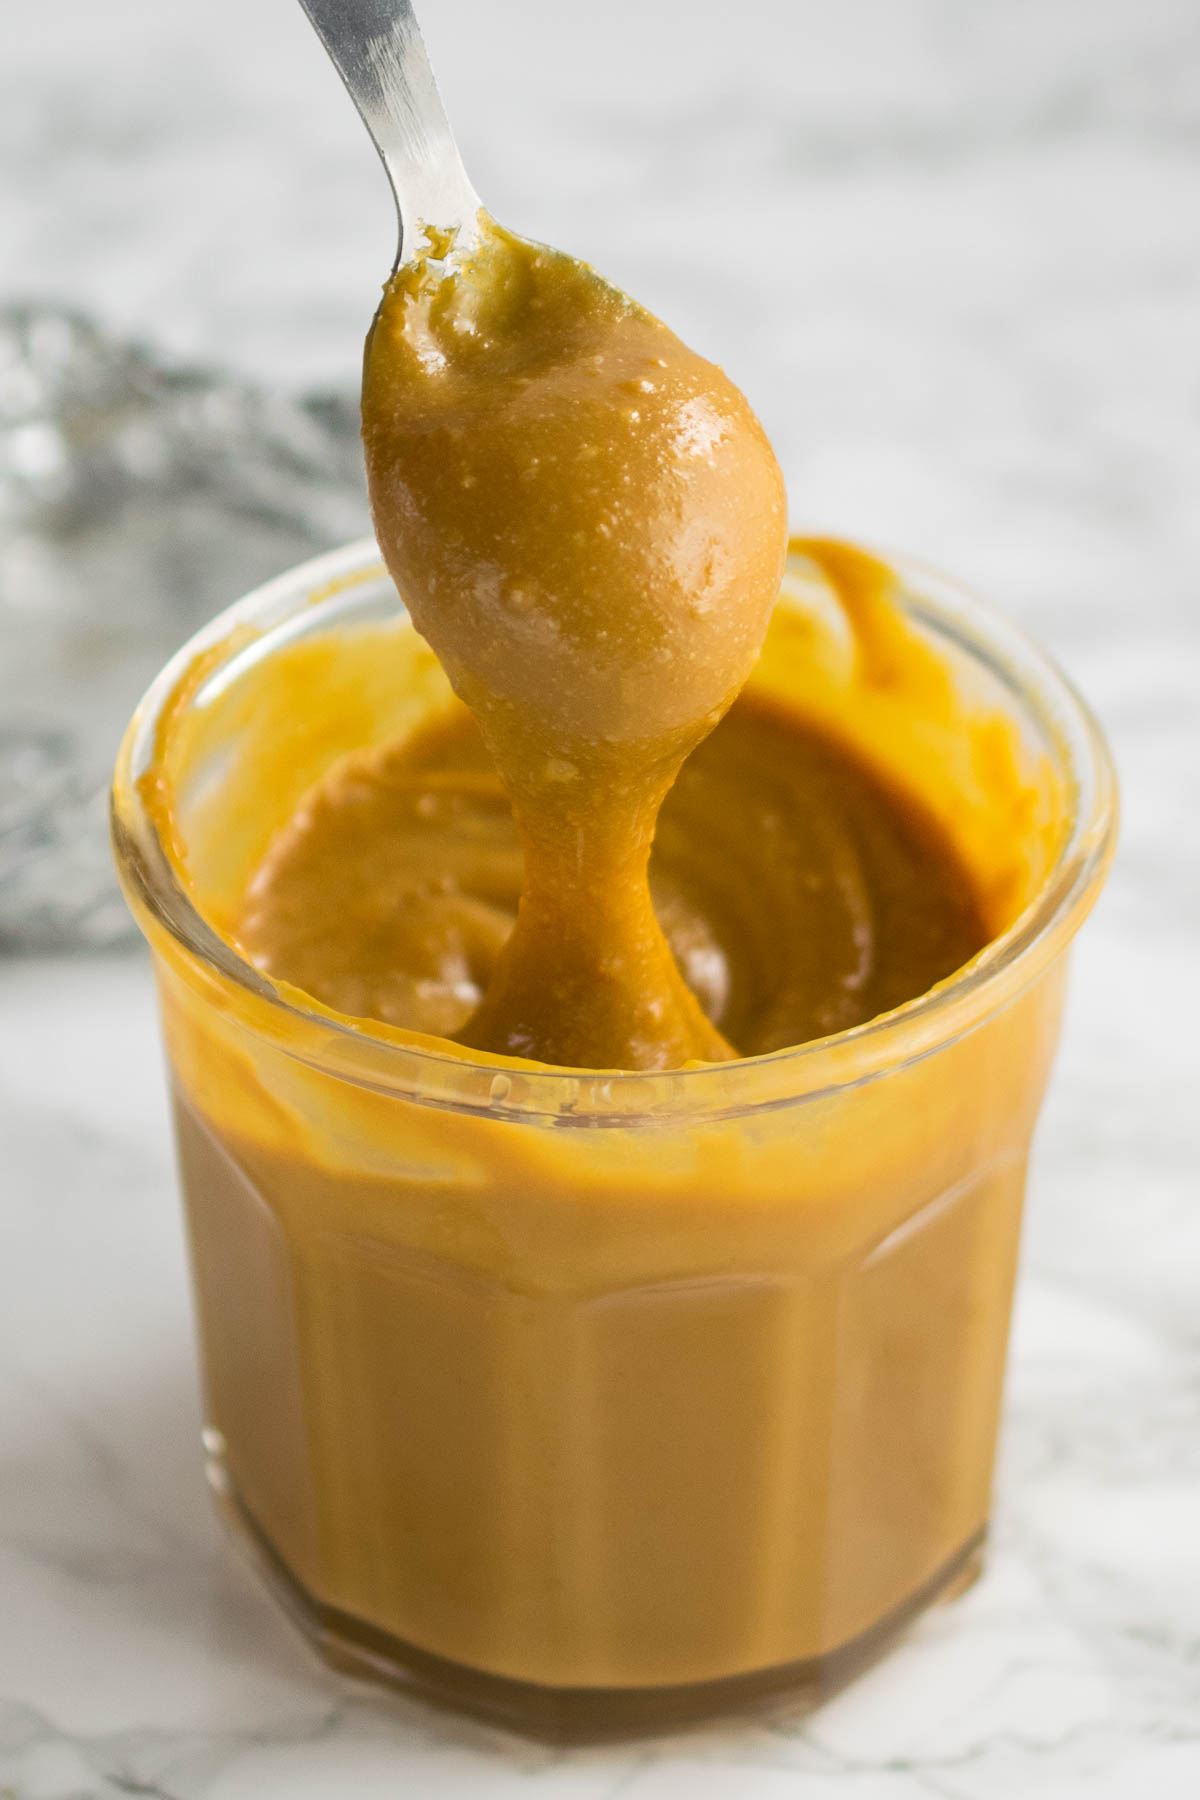 How to make dulce de leche (caramelised condensed milk) in the Instant Pot